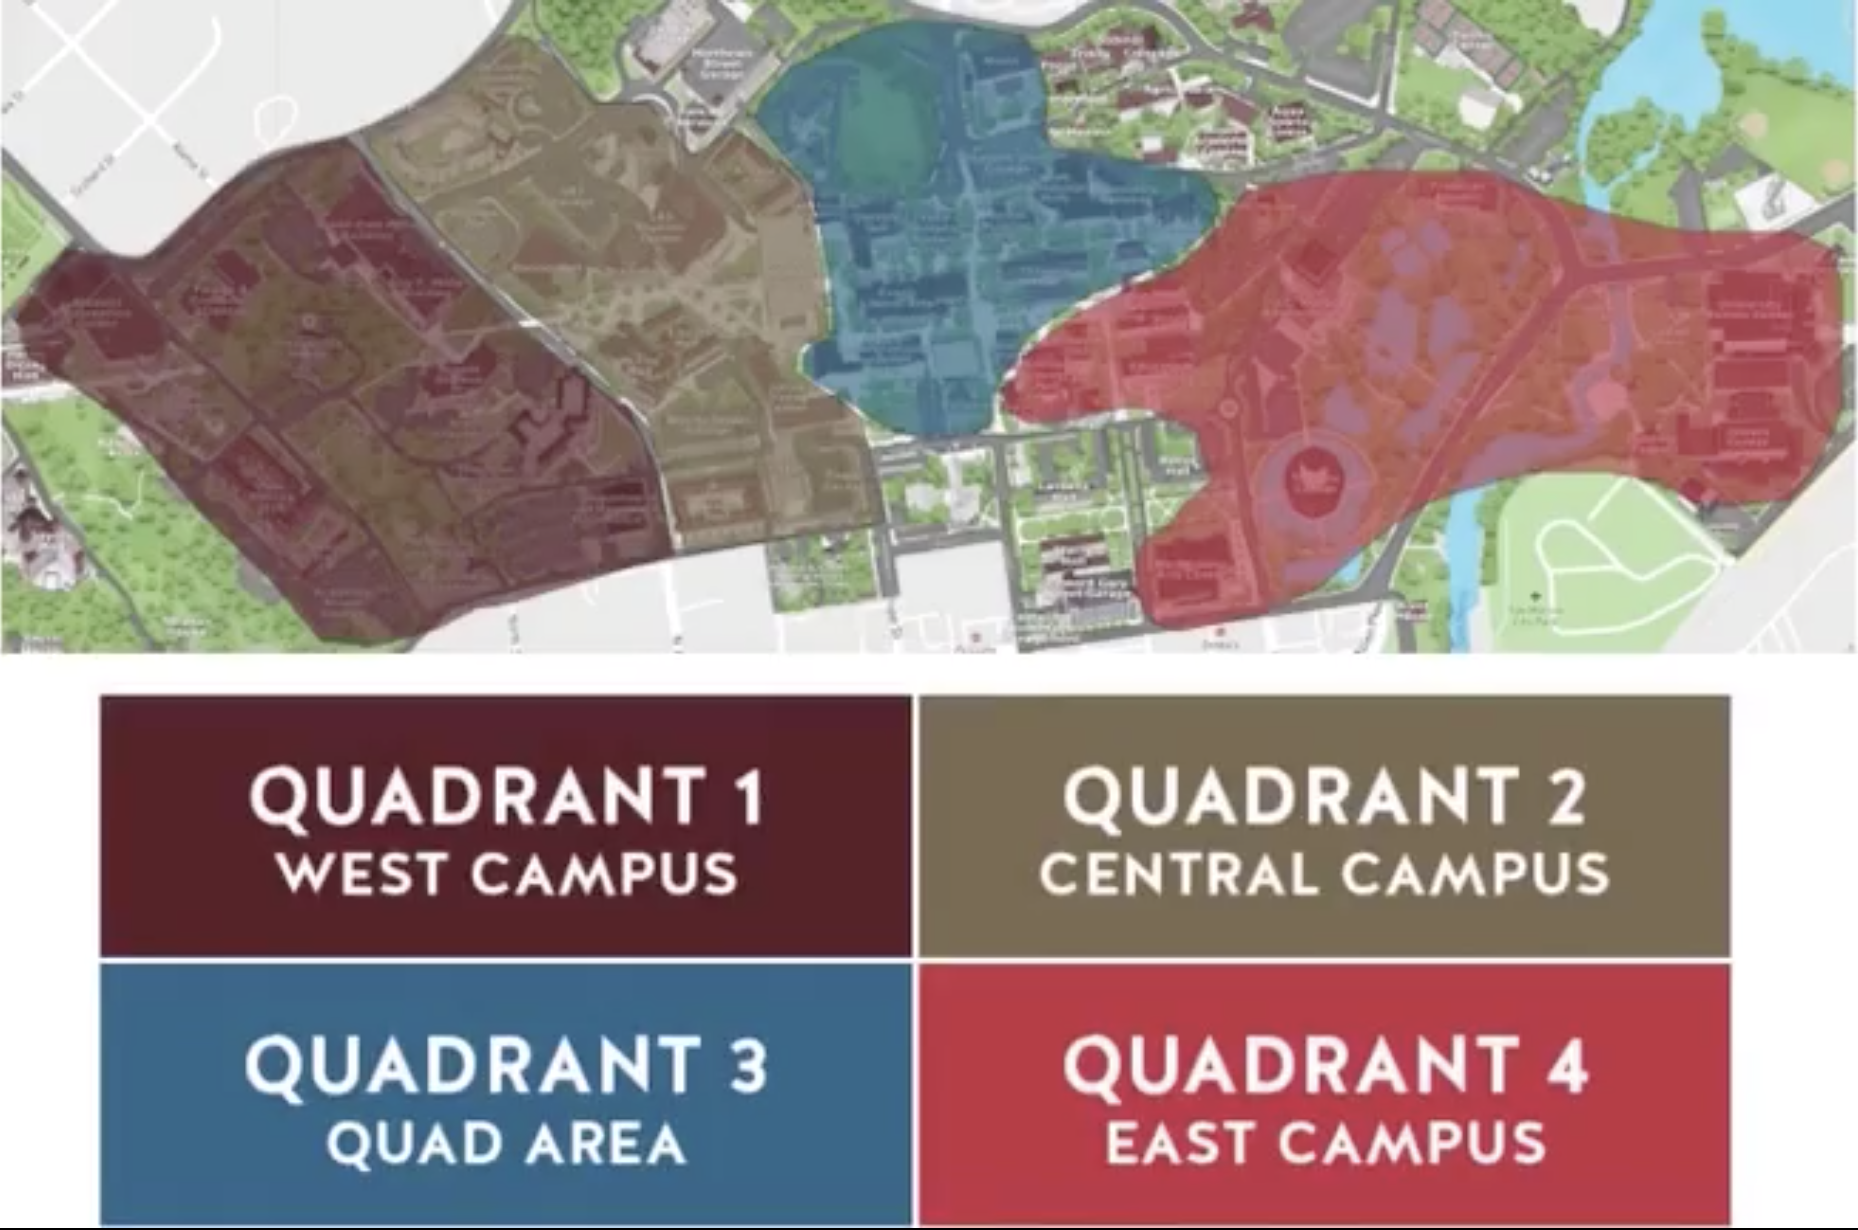 a map of the texas state campus that is color coded into four quadrants: quadrant one is maroon and marks west campus on the far left side of the map, quadrant two is gold and marks central campus on the left-middle side of the map, quadrant three is blue and marks the quad area on the right-middle side of the map, and quadrant four is red and marks east campus on the far right side of the map.